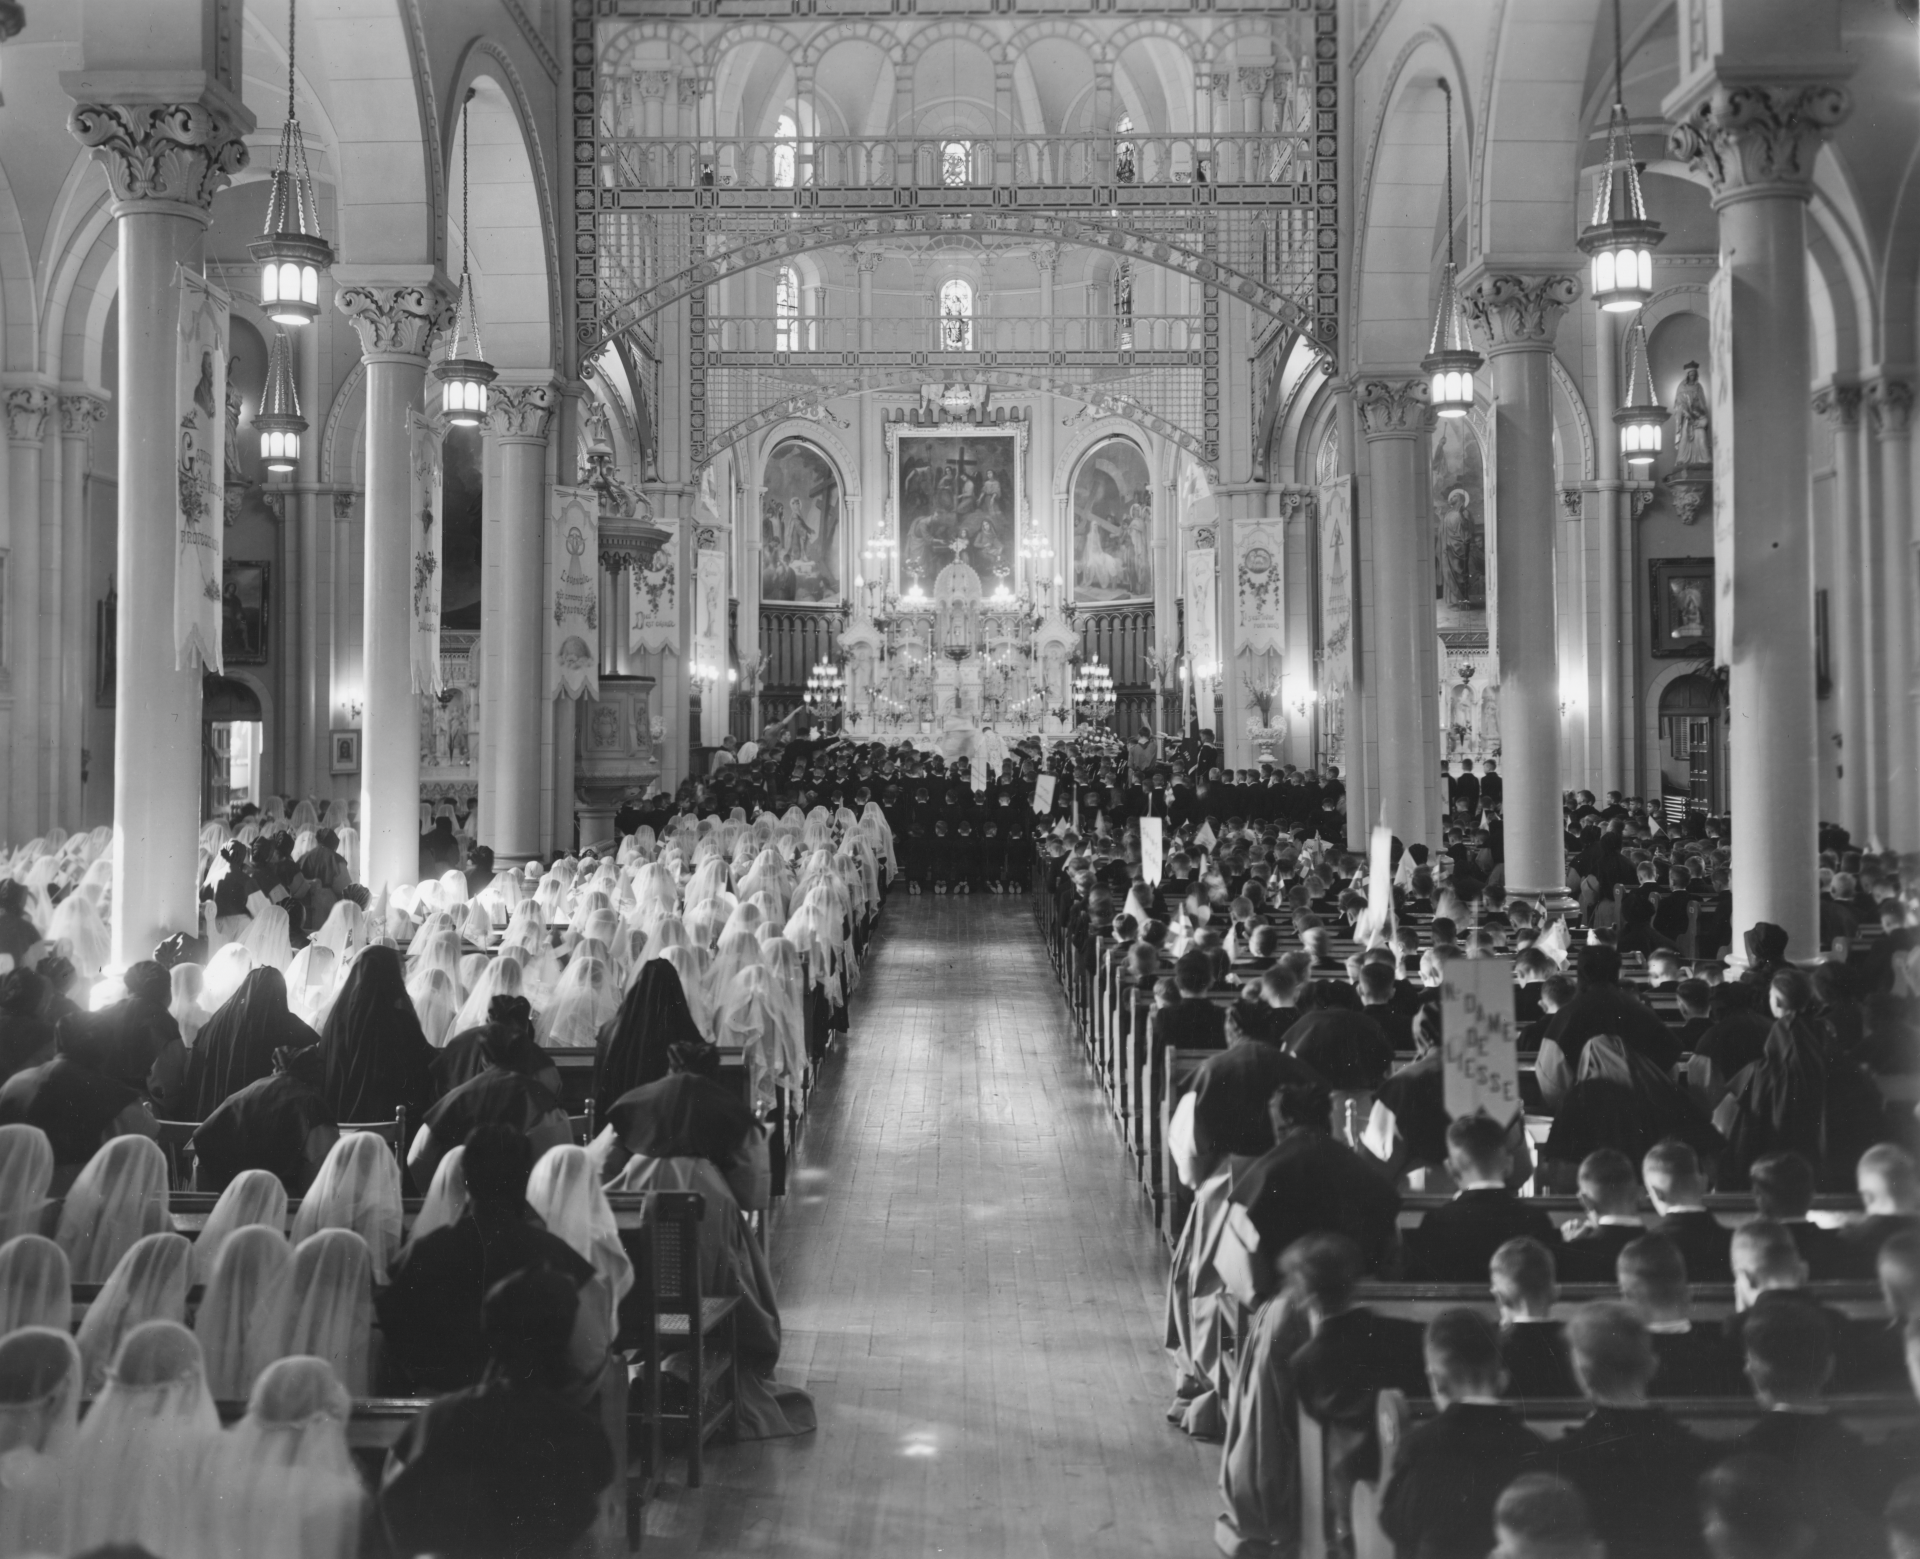 A historic photograph showing a large congregation attending a ceremony in a church with ornate interiors and stained glass.